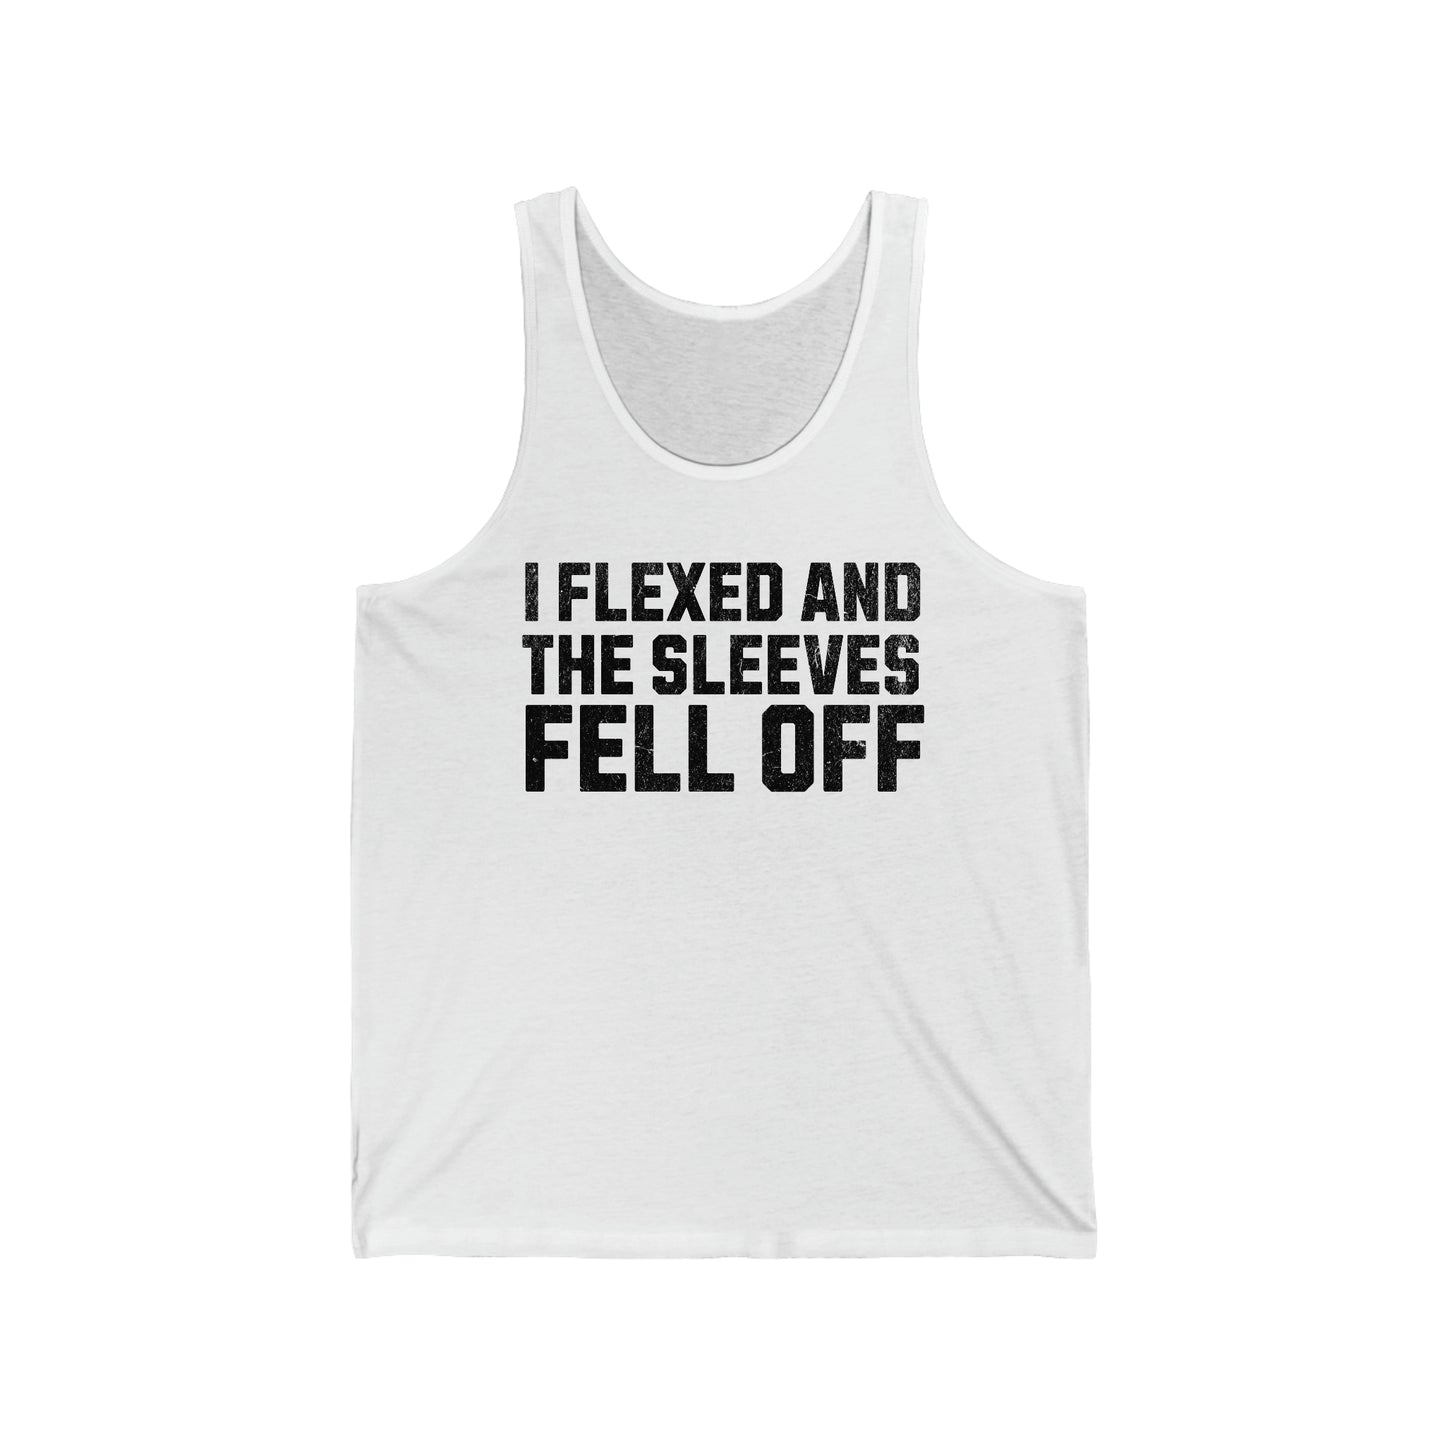 "I Flexed and The Sleeves Fell Off" Unisex Jersey Tank